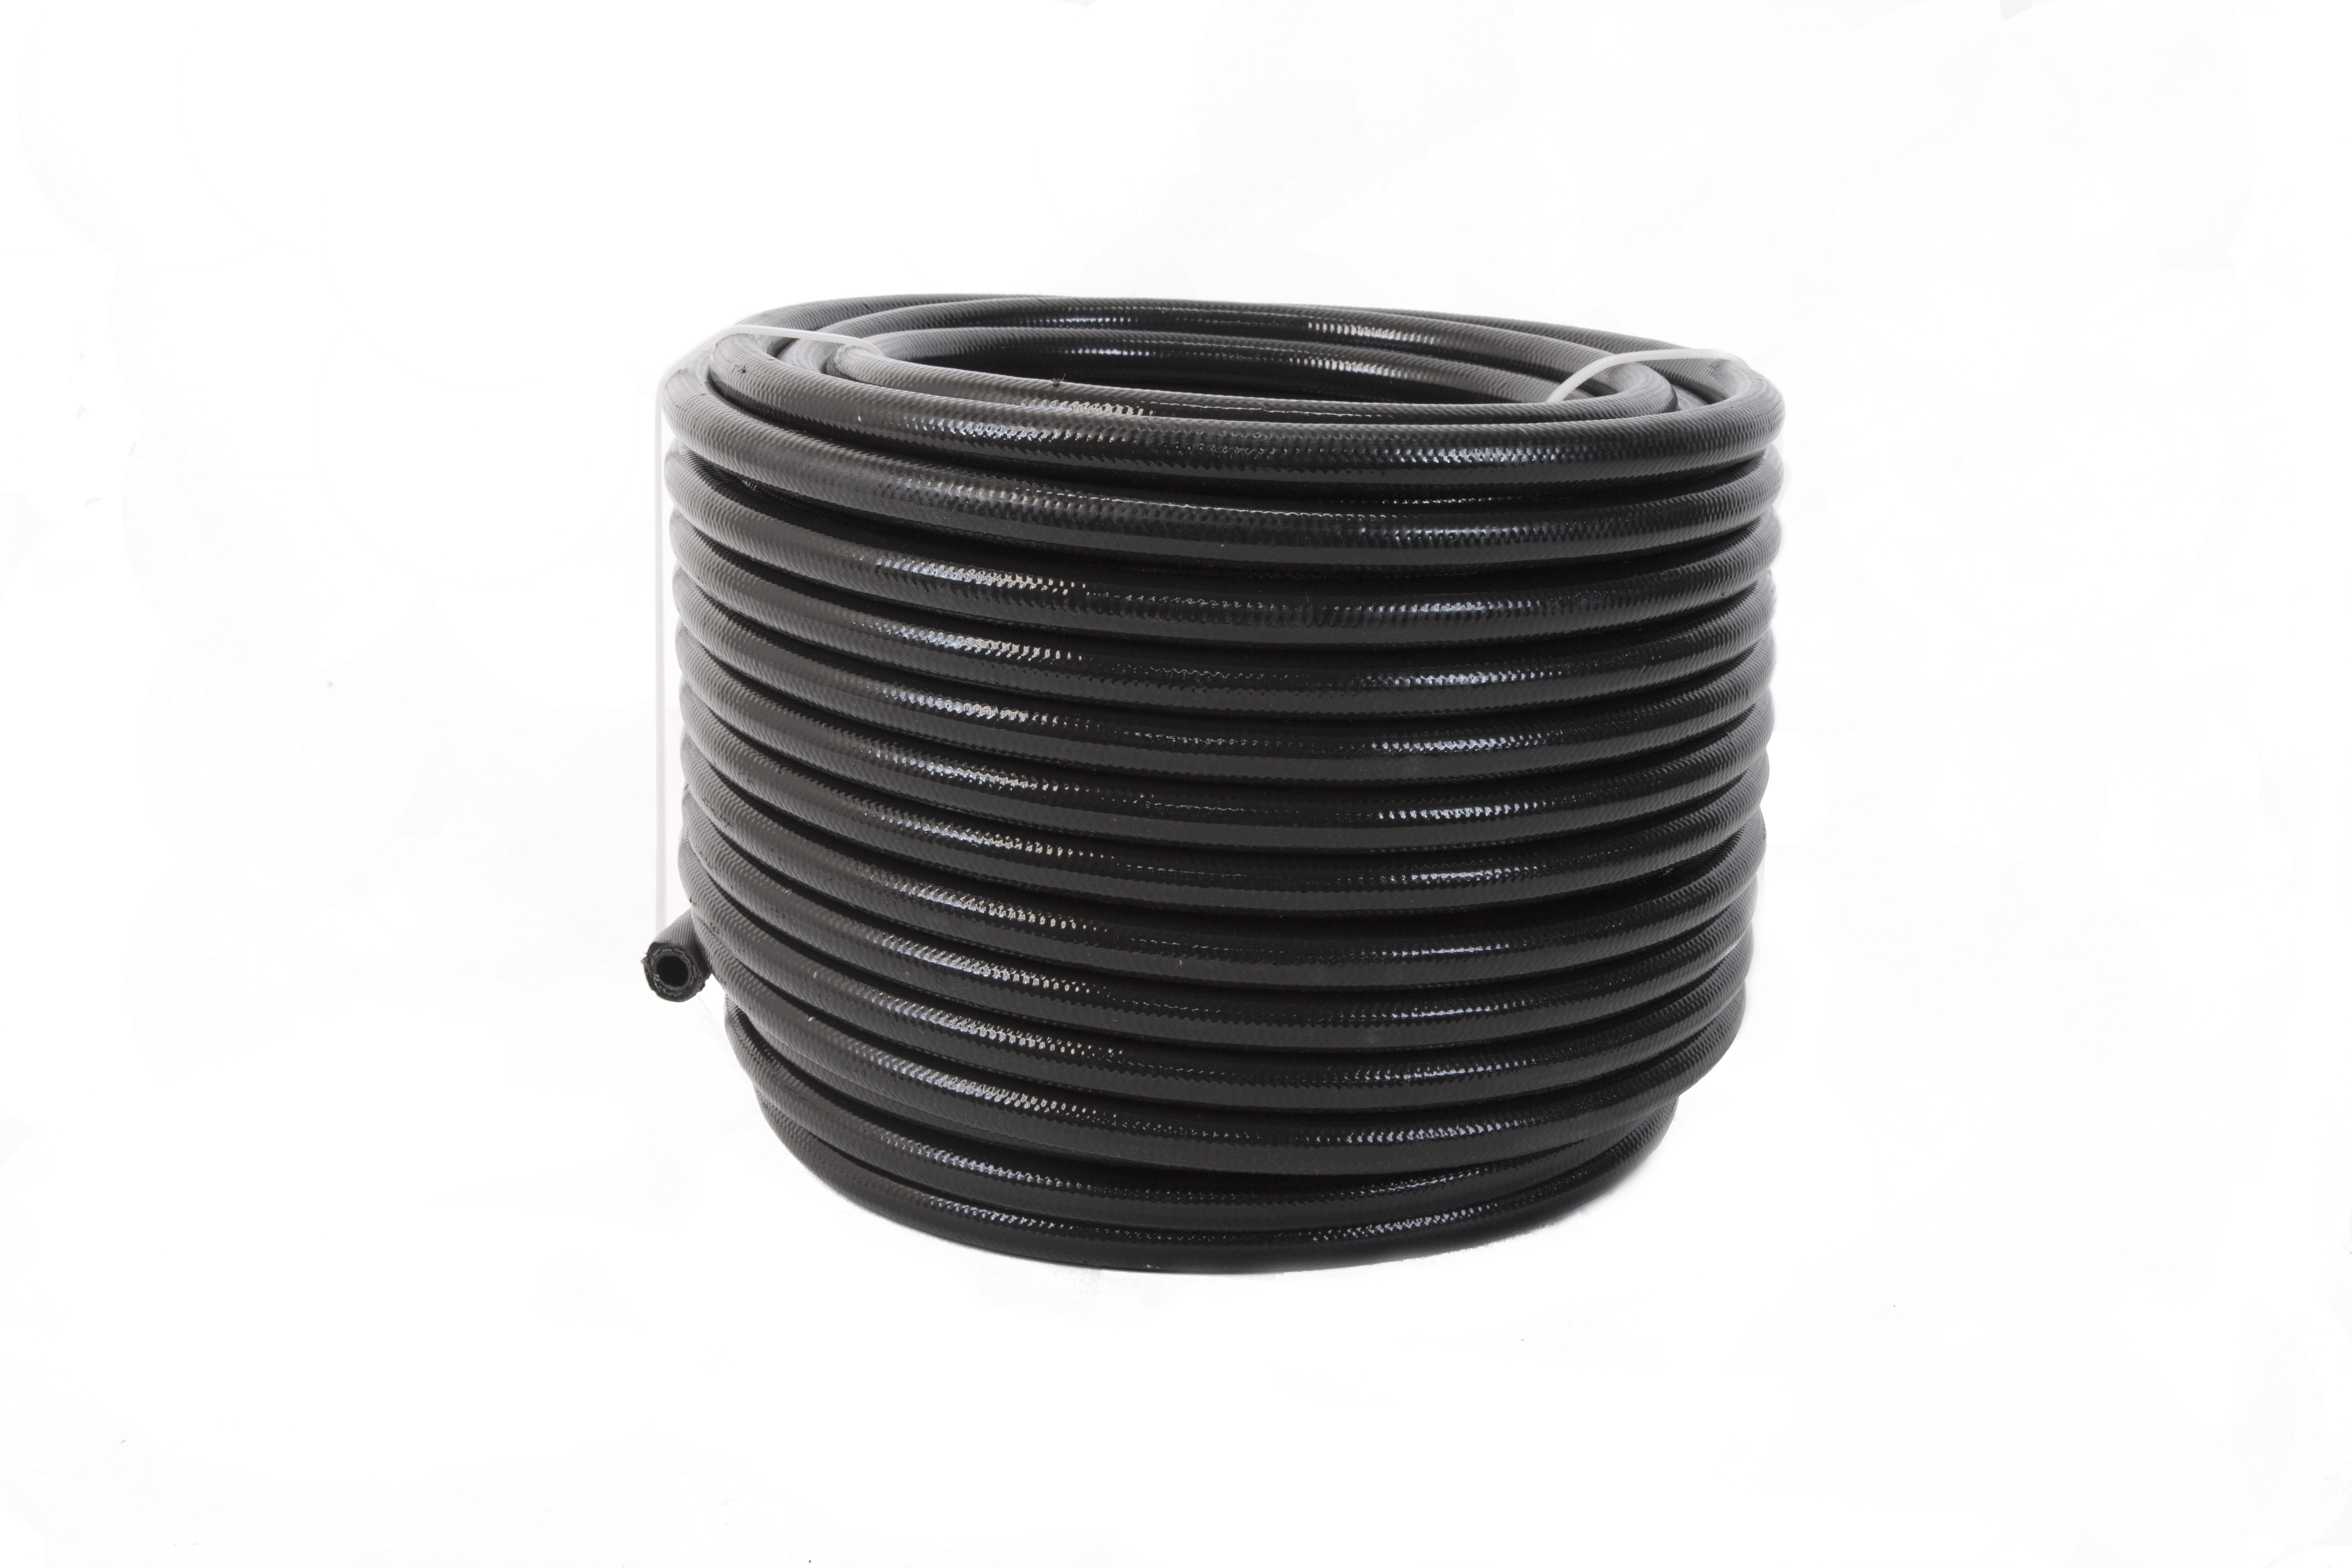 Aeromotive 15339 Hose, 12 AN, 16 ft, Braided Stainless / PTFE, Black, Each